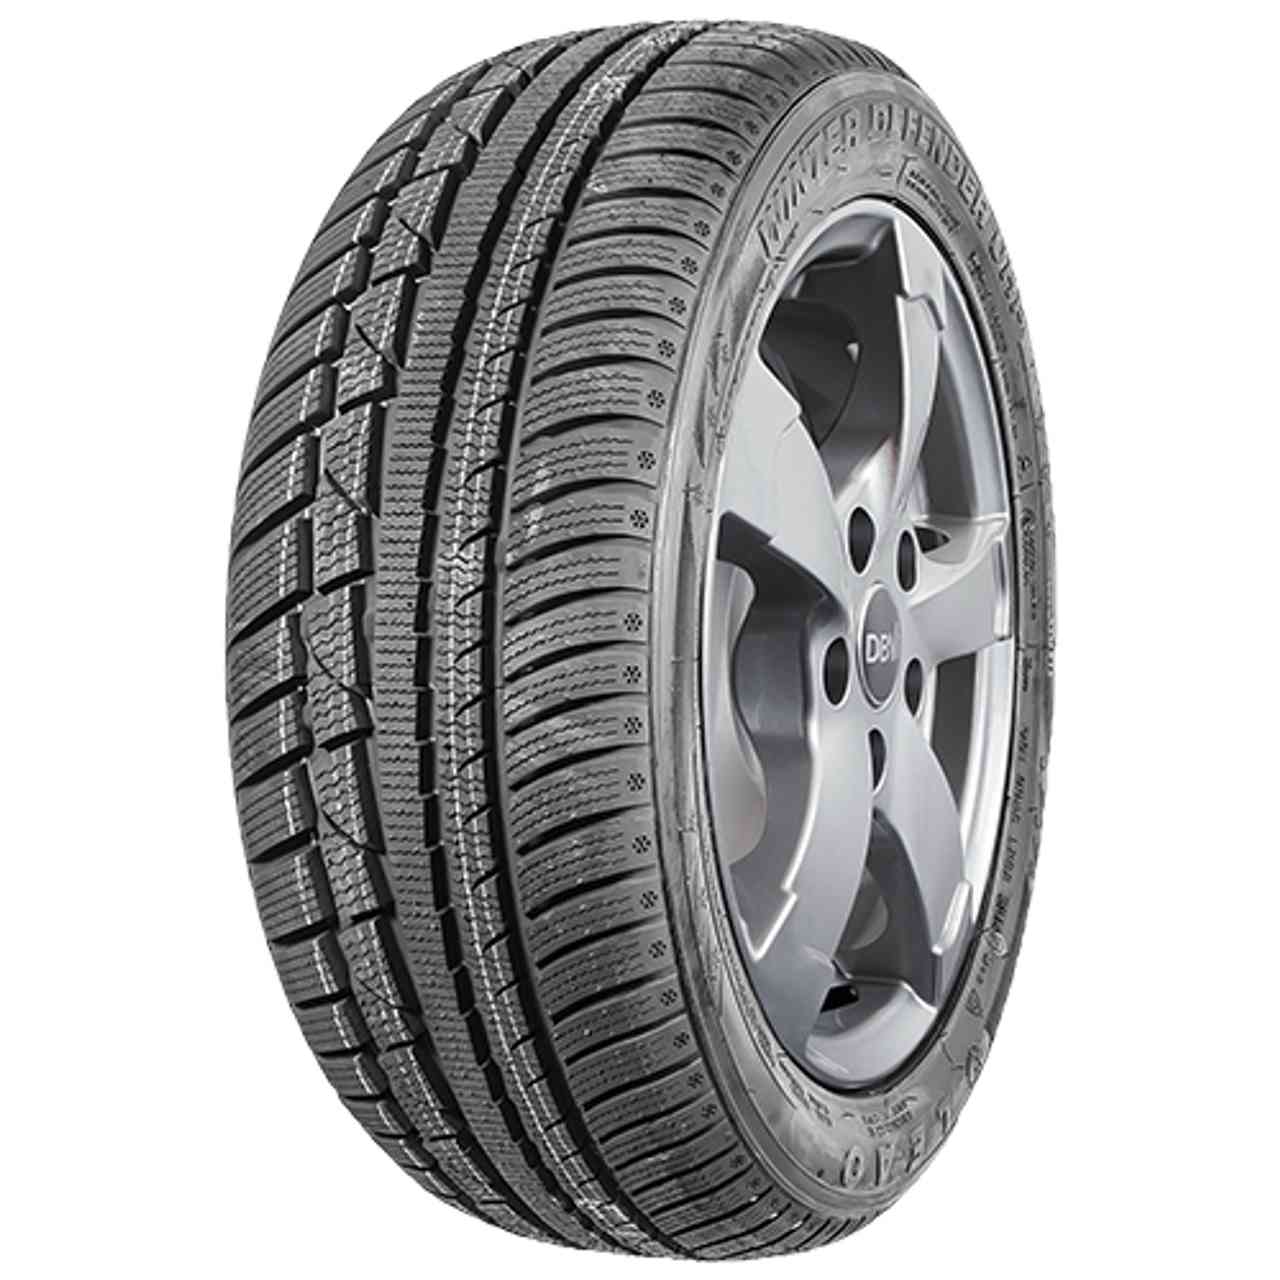 LEAO WINTER DEFENDER UHP 225/45R17 94V BSW